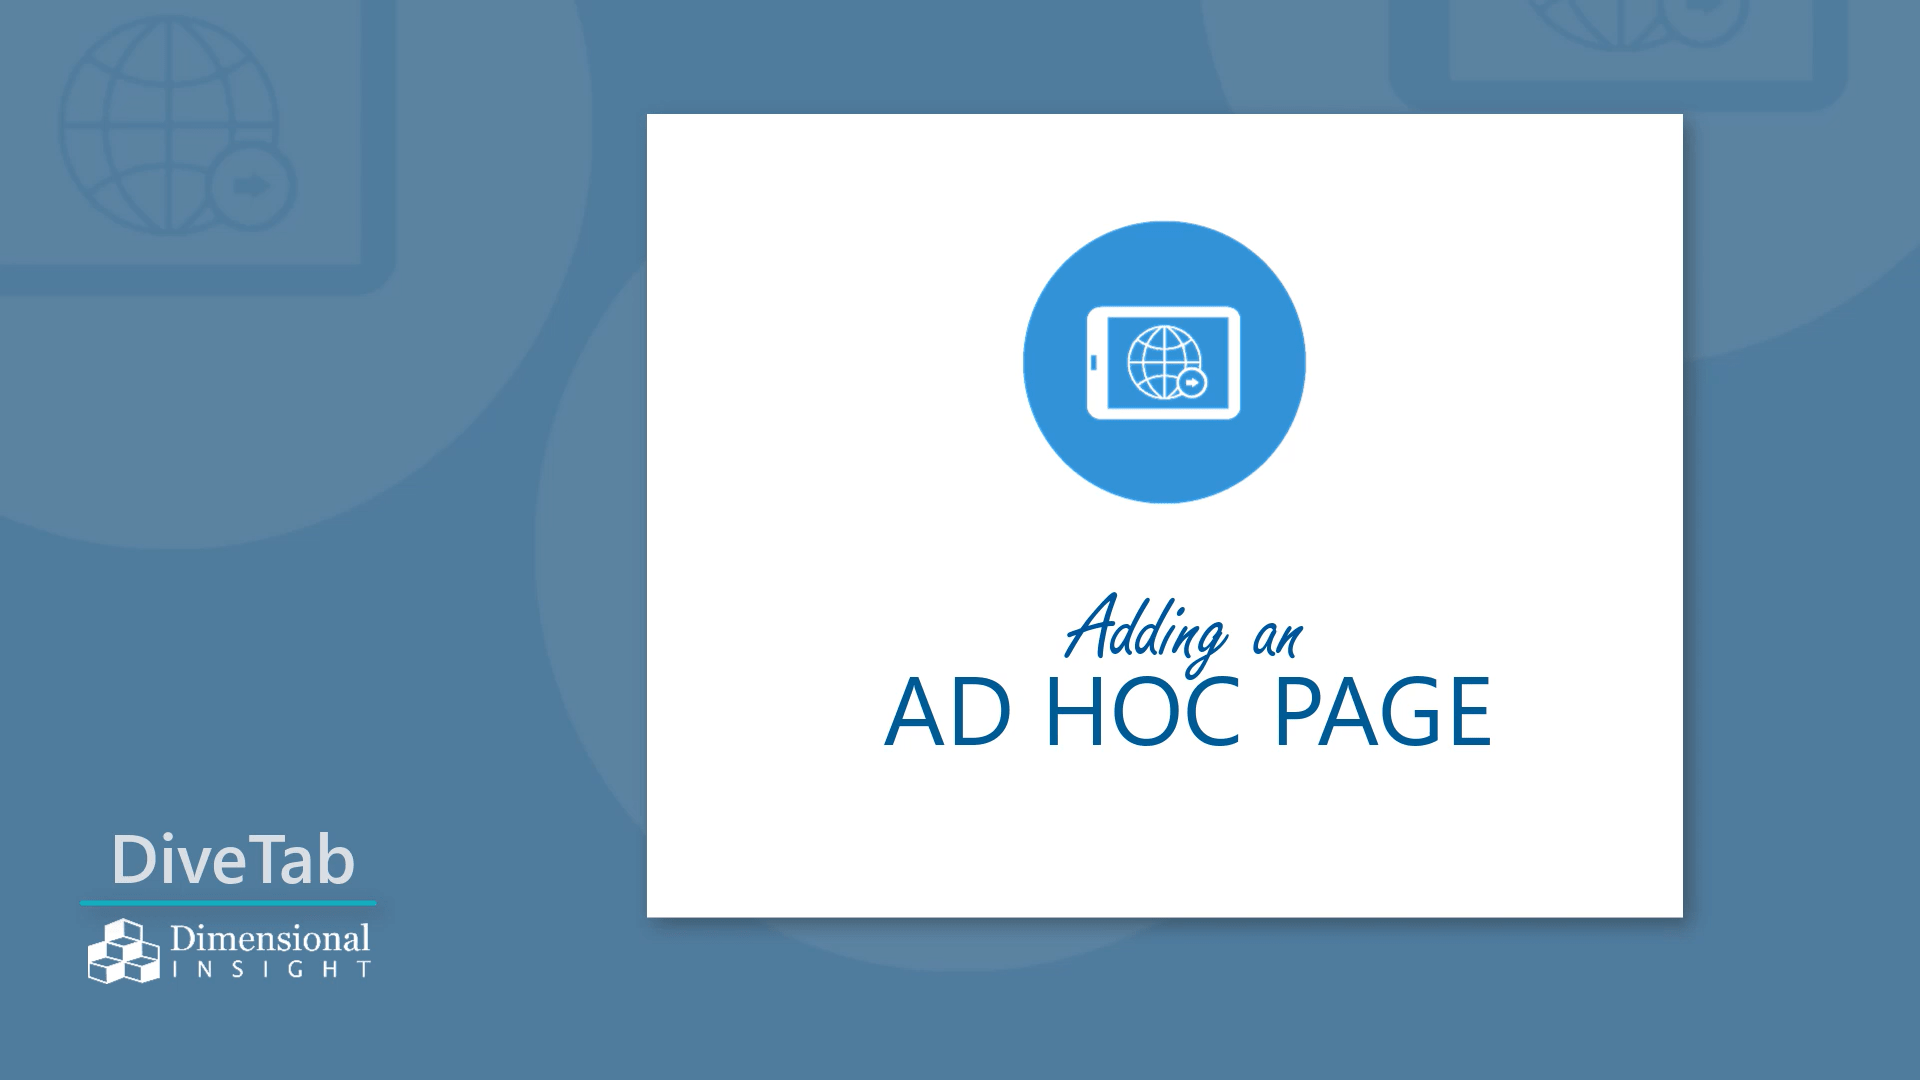 Adding an Ad Hoc Page